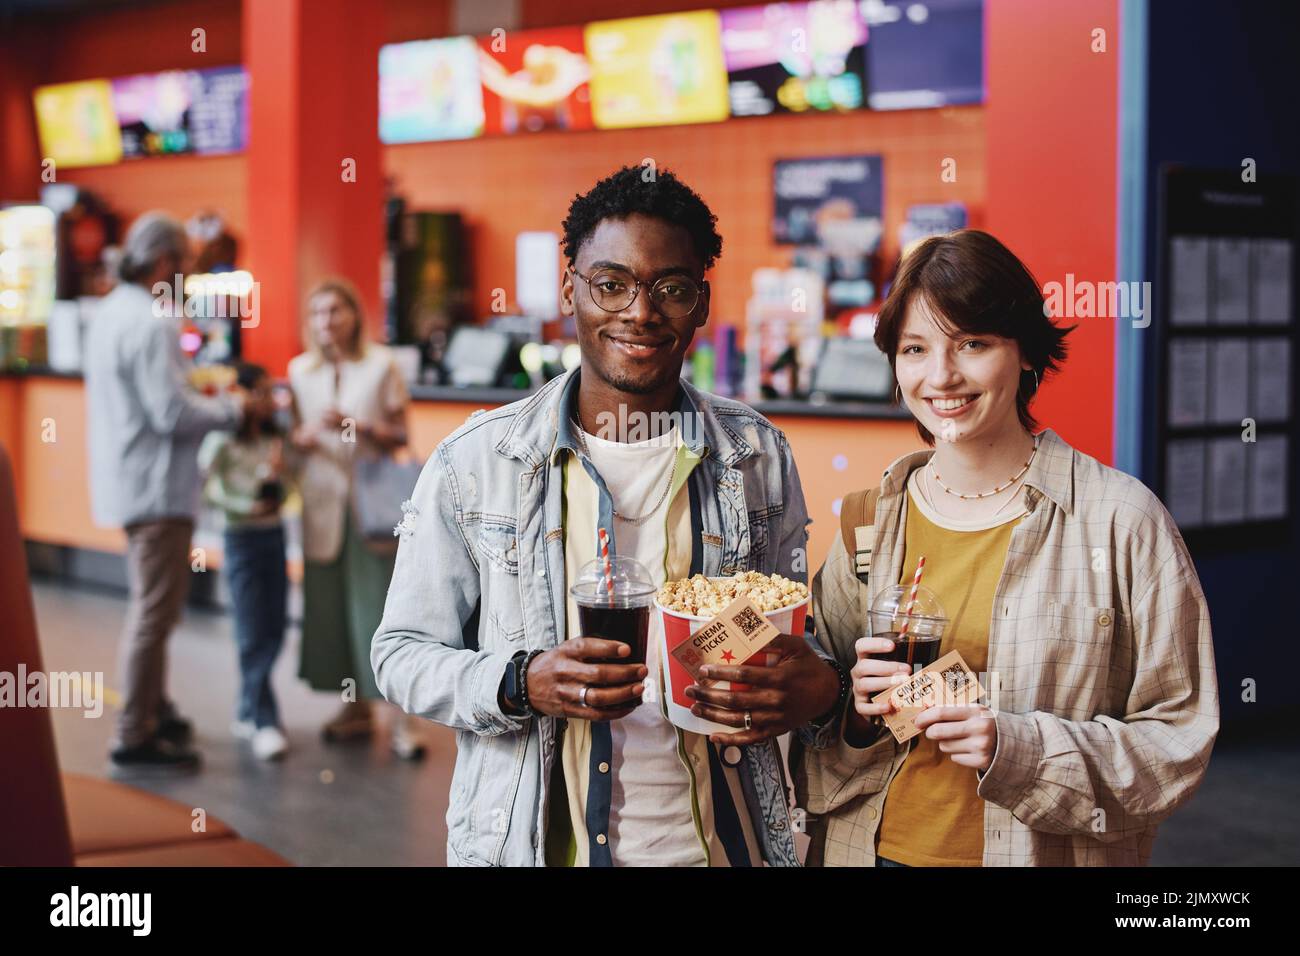 Portrait of young Black man and Caucasian woman wearing casual clothes having date at cinema holding popcorn, drinks and tickets smiling at camera Stock Photo